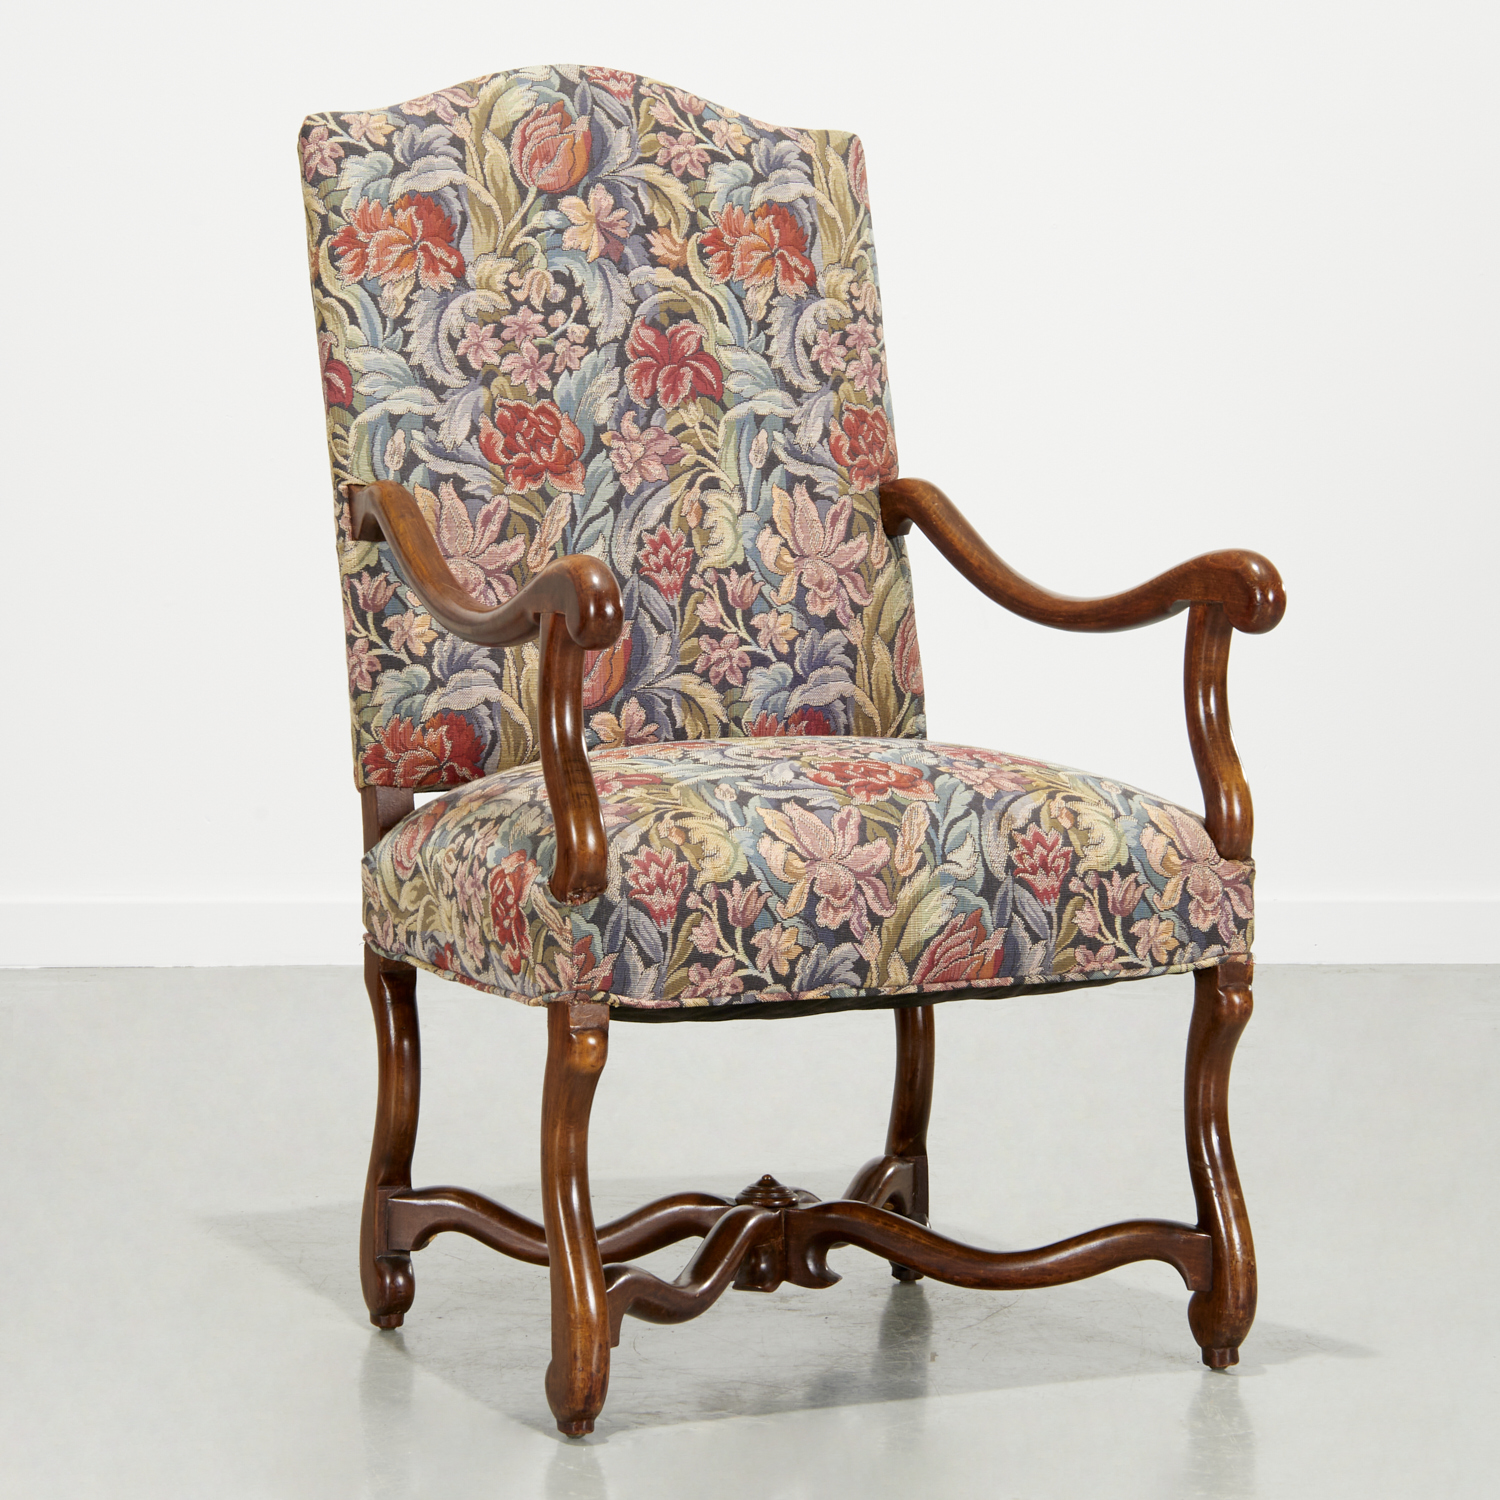 LOUIS XIV STYLE TAPESTRY FAUTEUIL